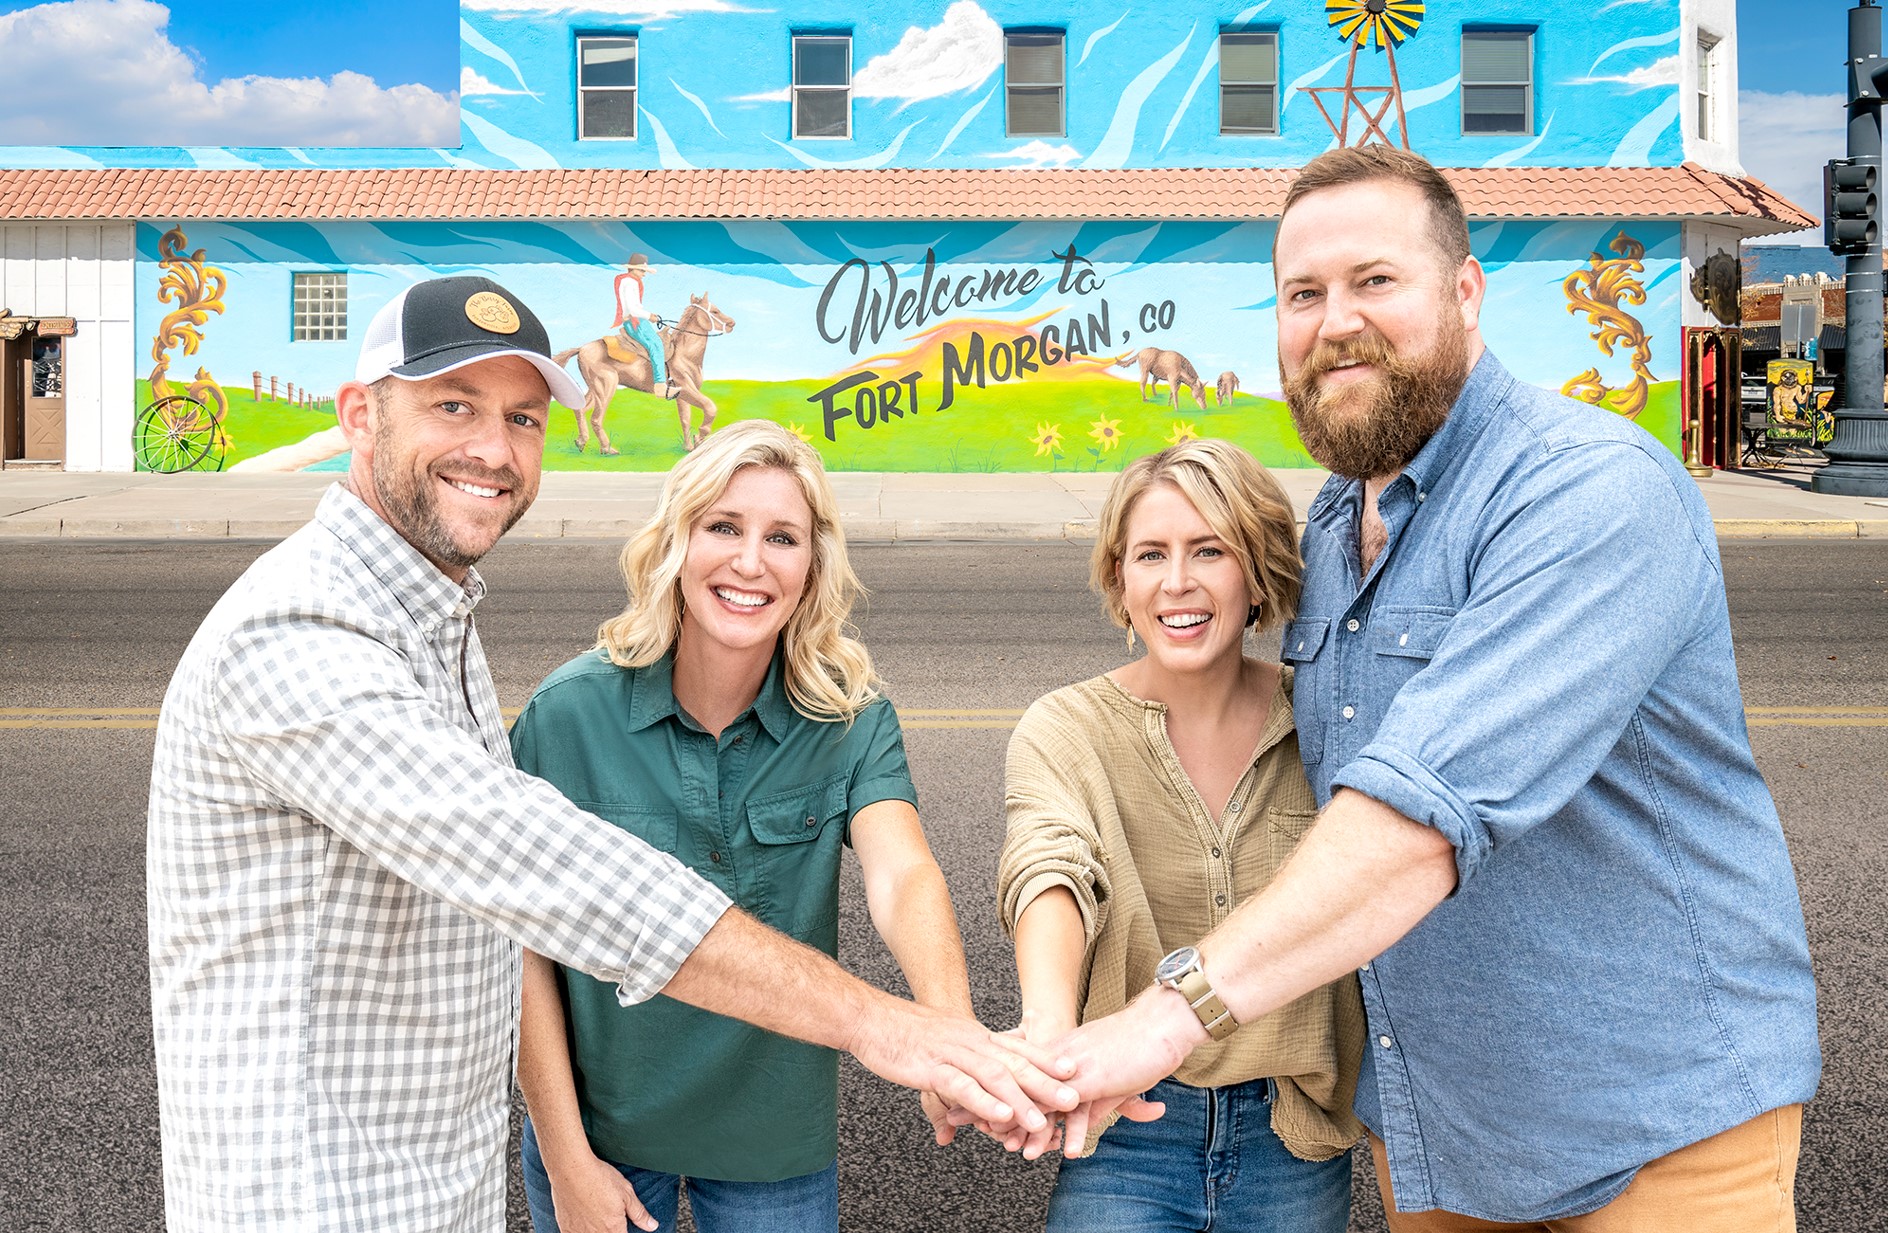 HGTV Doubles The Starpower Behind Its WholeTown Renovation of Fort